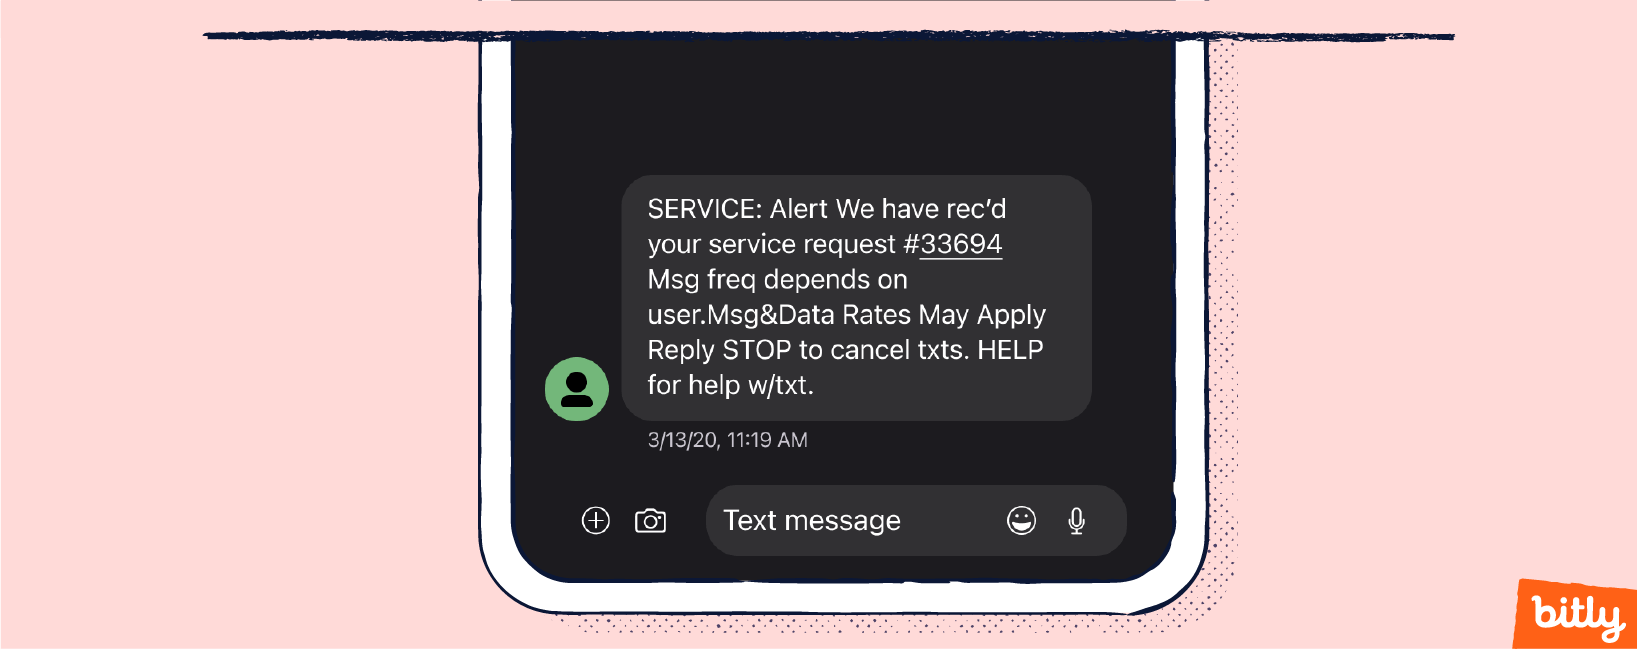 An SMS on a smartphone confirming a service request.